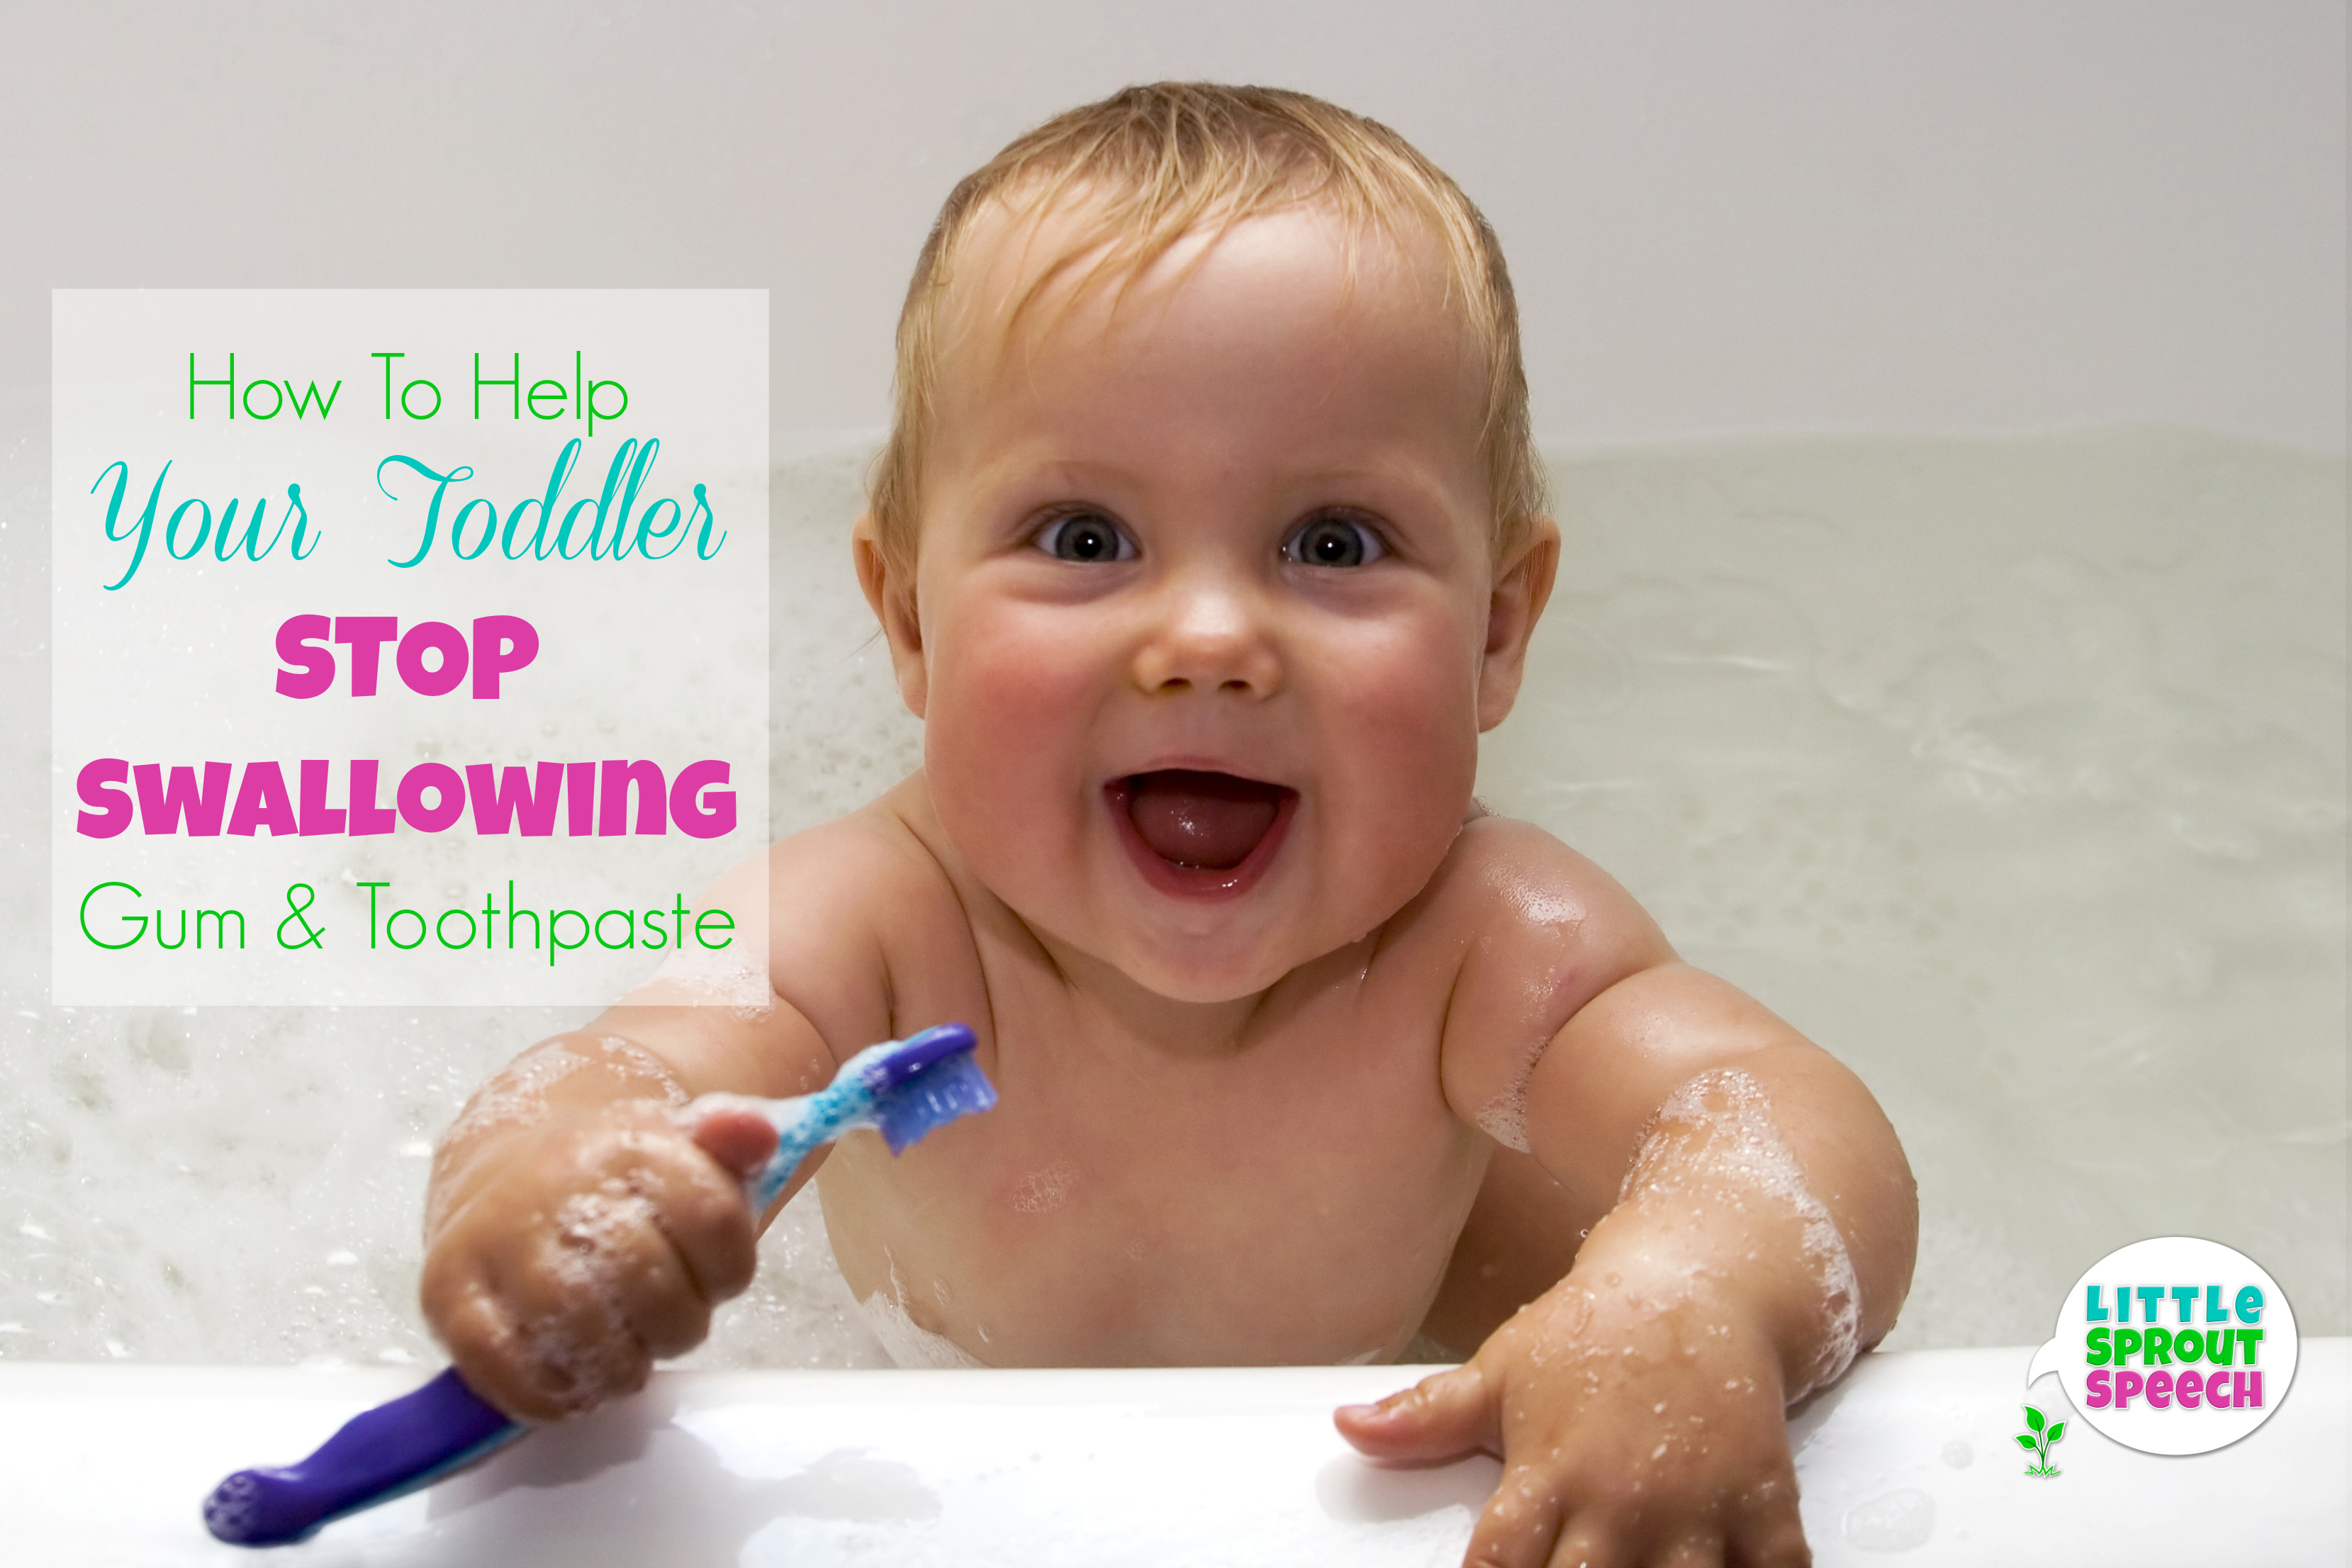 Smiling baby with toothbrush